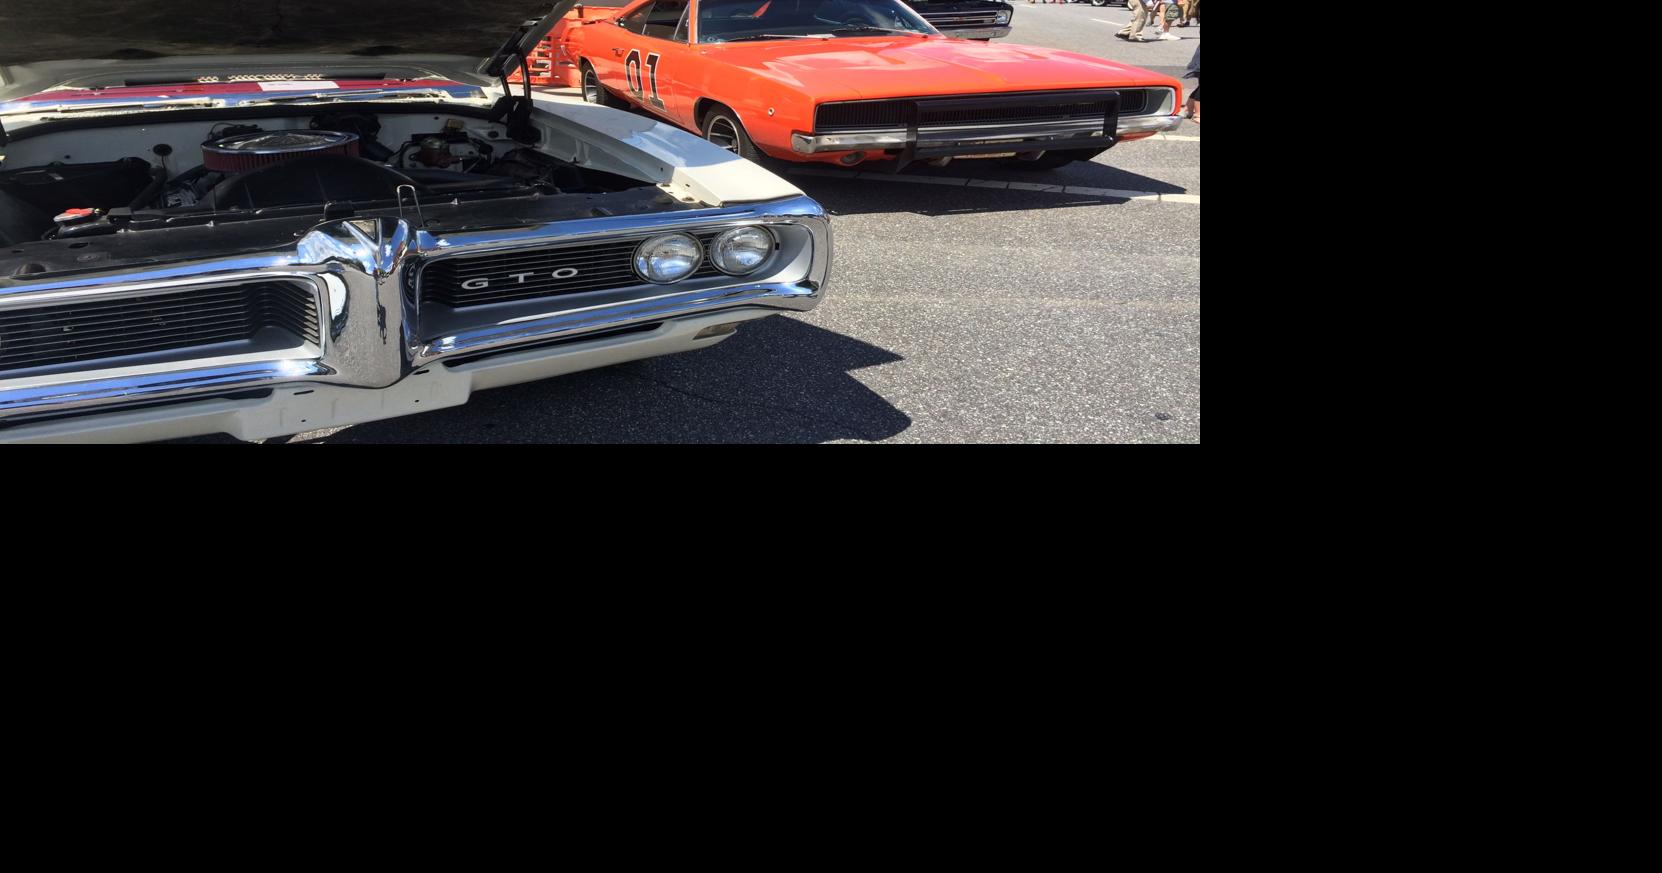 GALLERY Soldiers Reunion hosts Newton car show